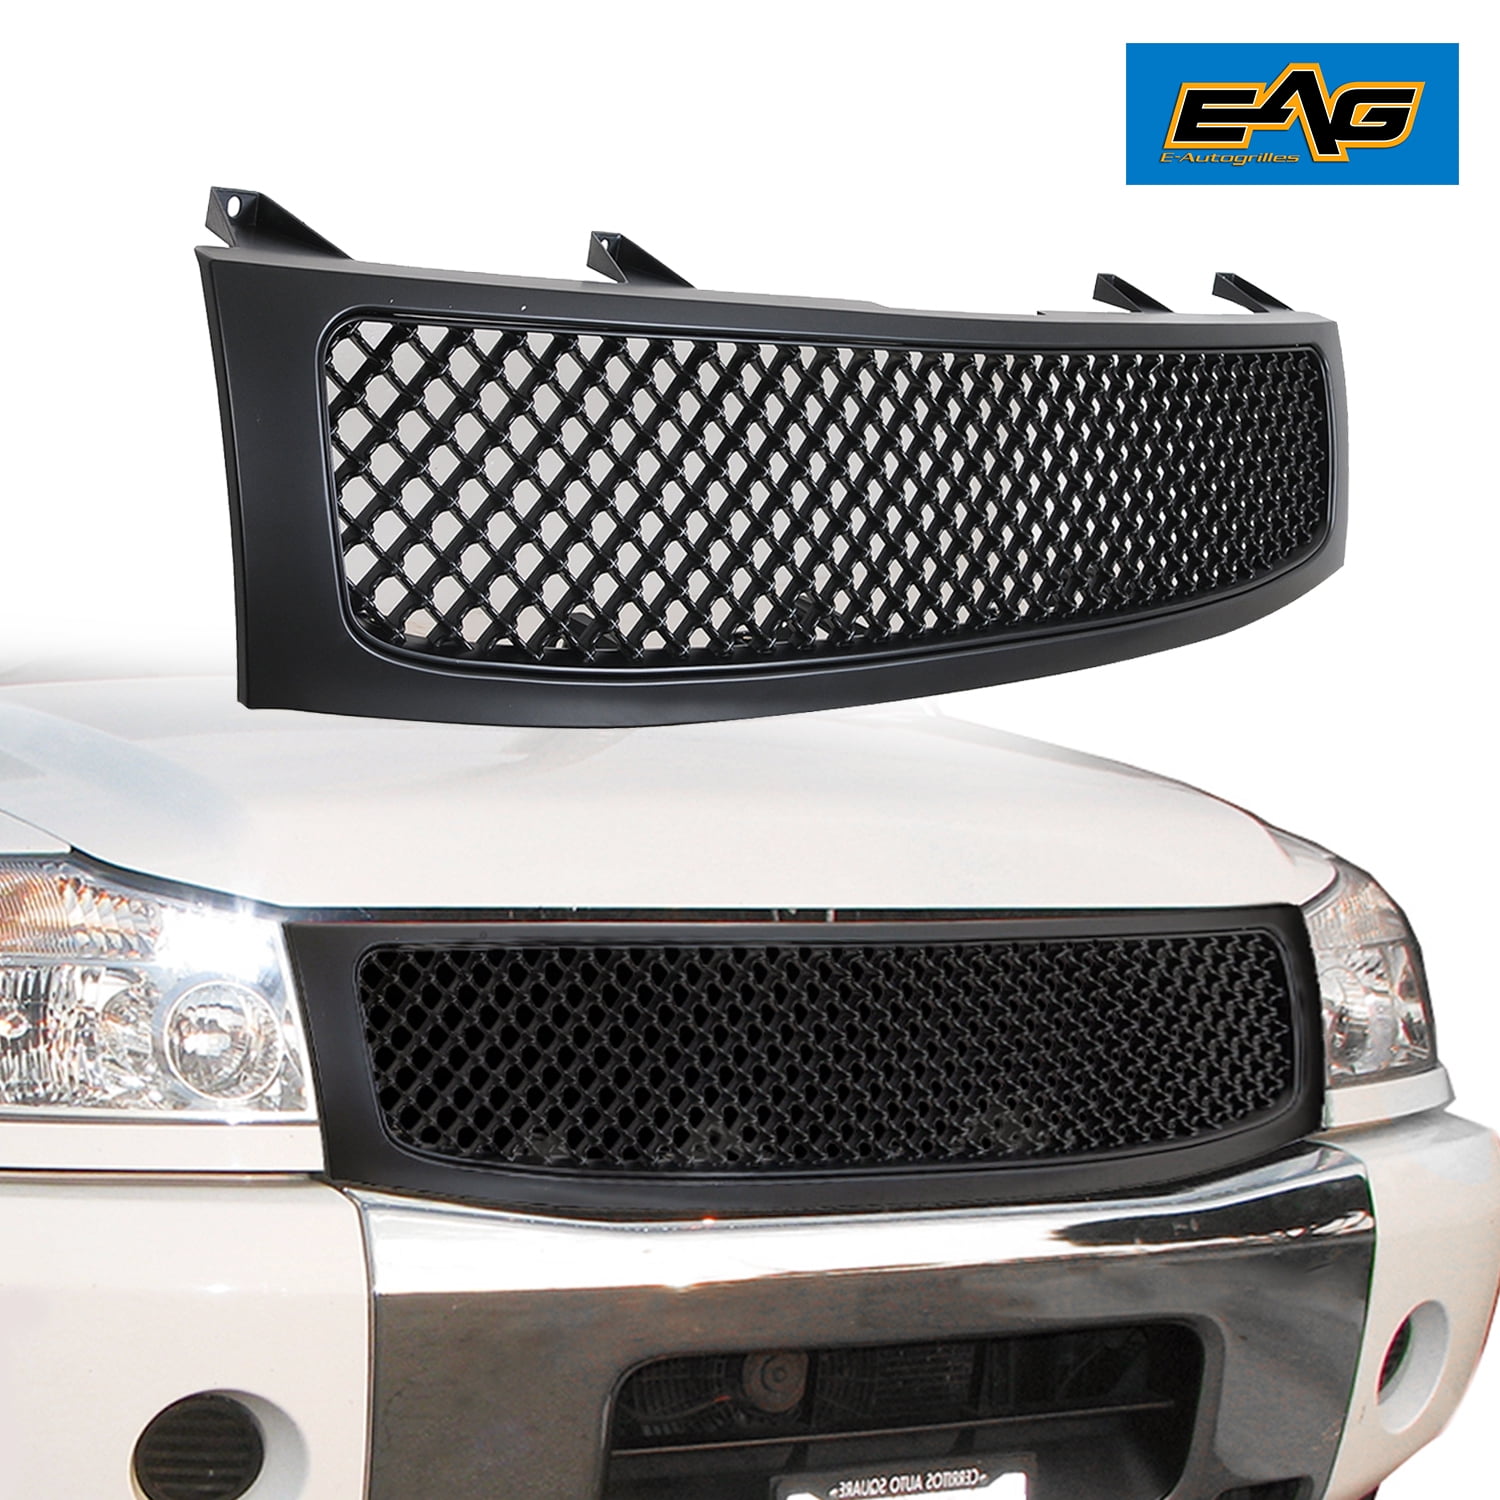 EAG Replacement Mesh Grille Front Hood Full Grill Fit for 04-12 Nissan Titan/05-07 Nissan Armada 